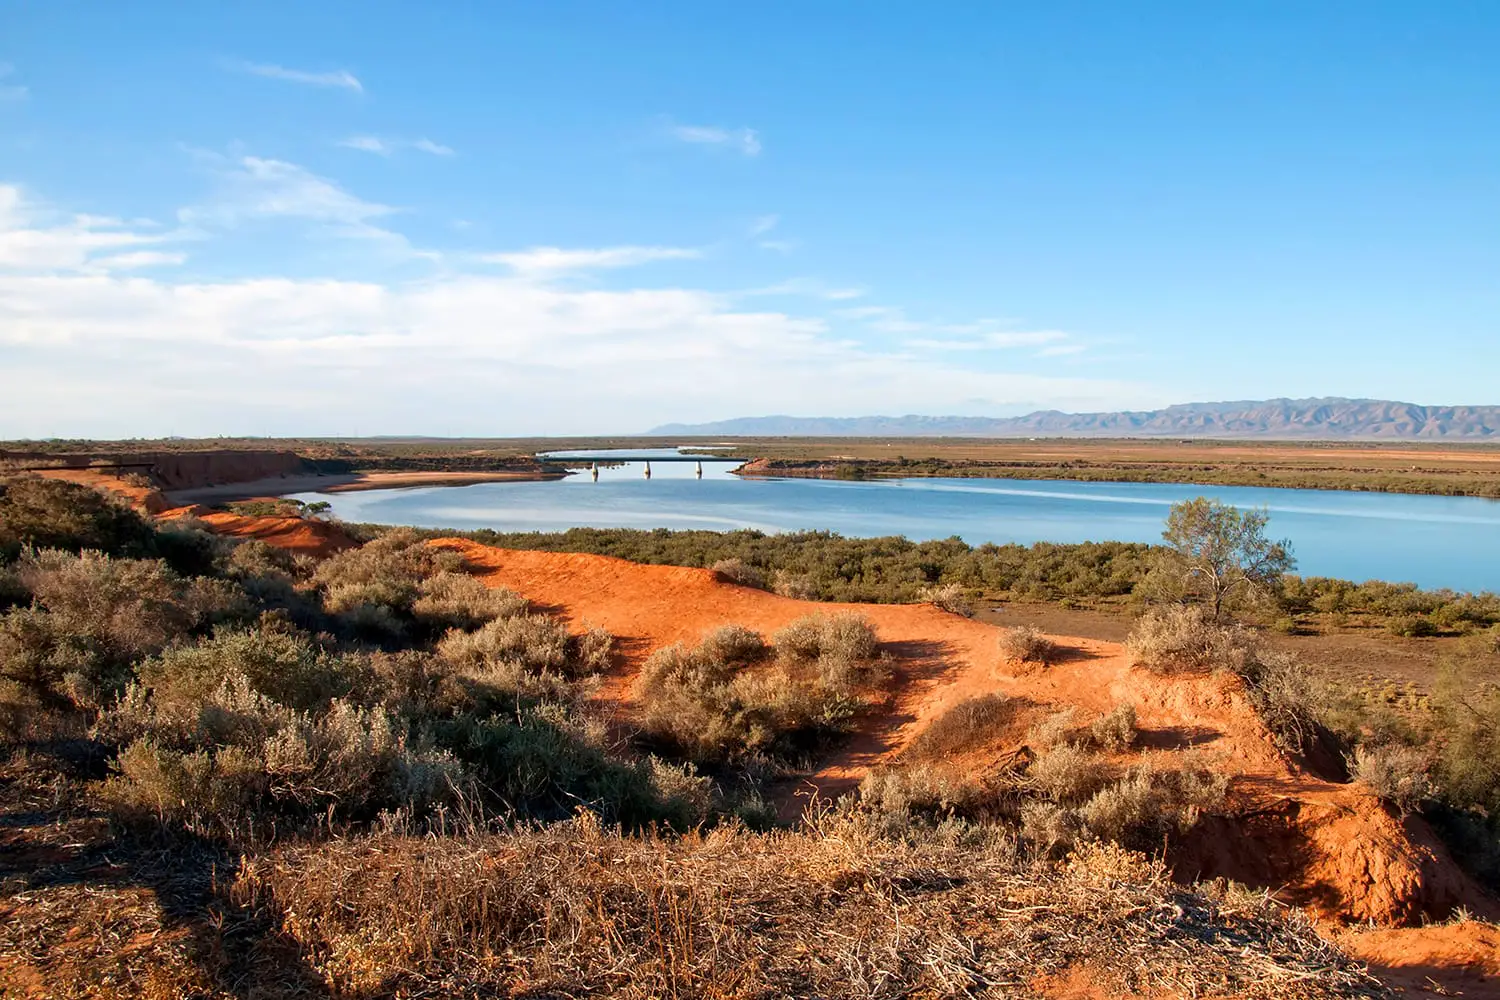 Port Augusta South Australia, termination of Spencer Gulf surrounded by desert landscape